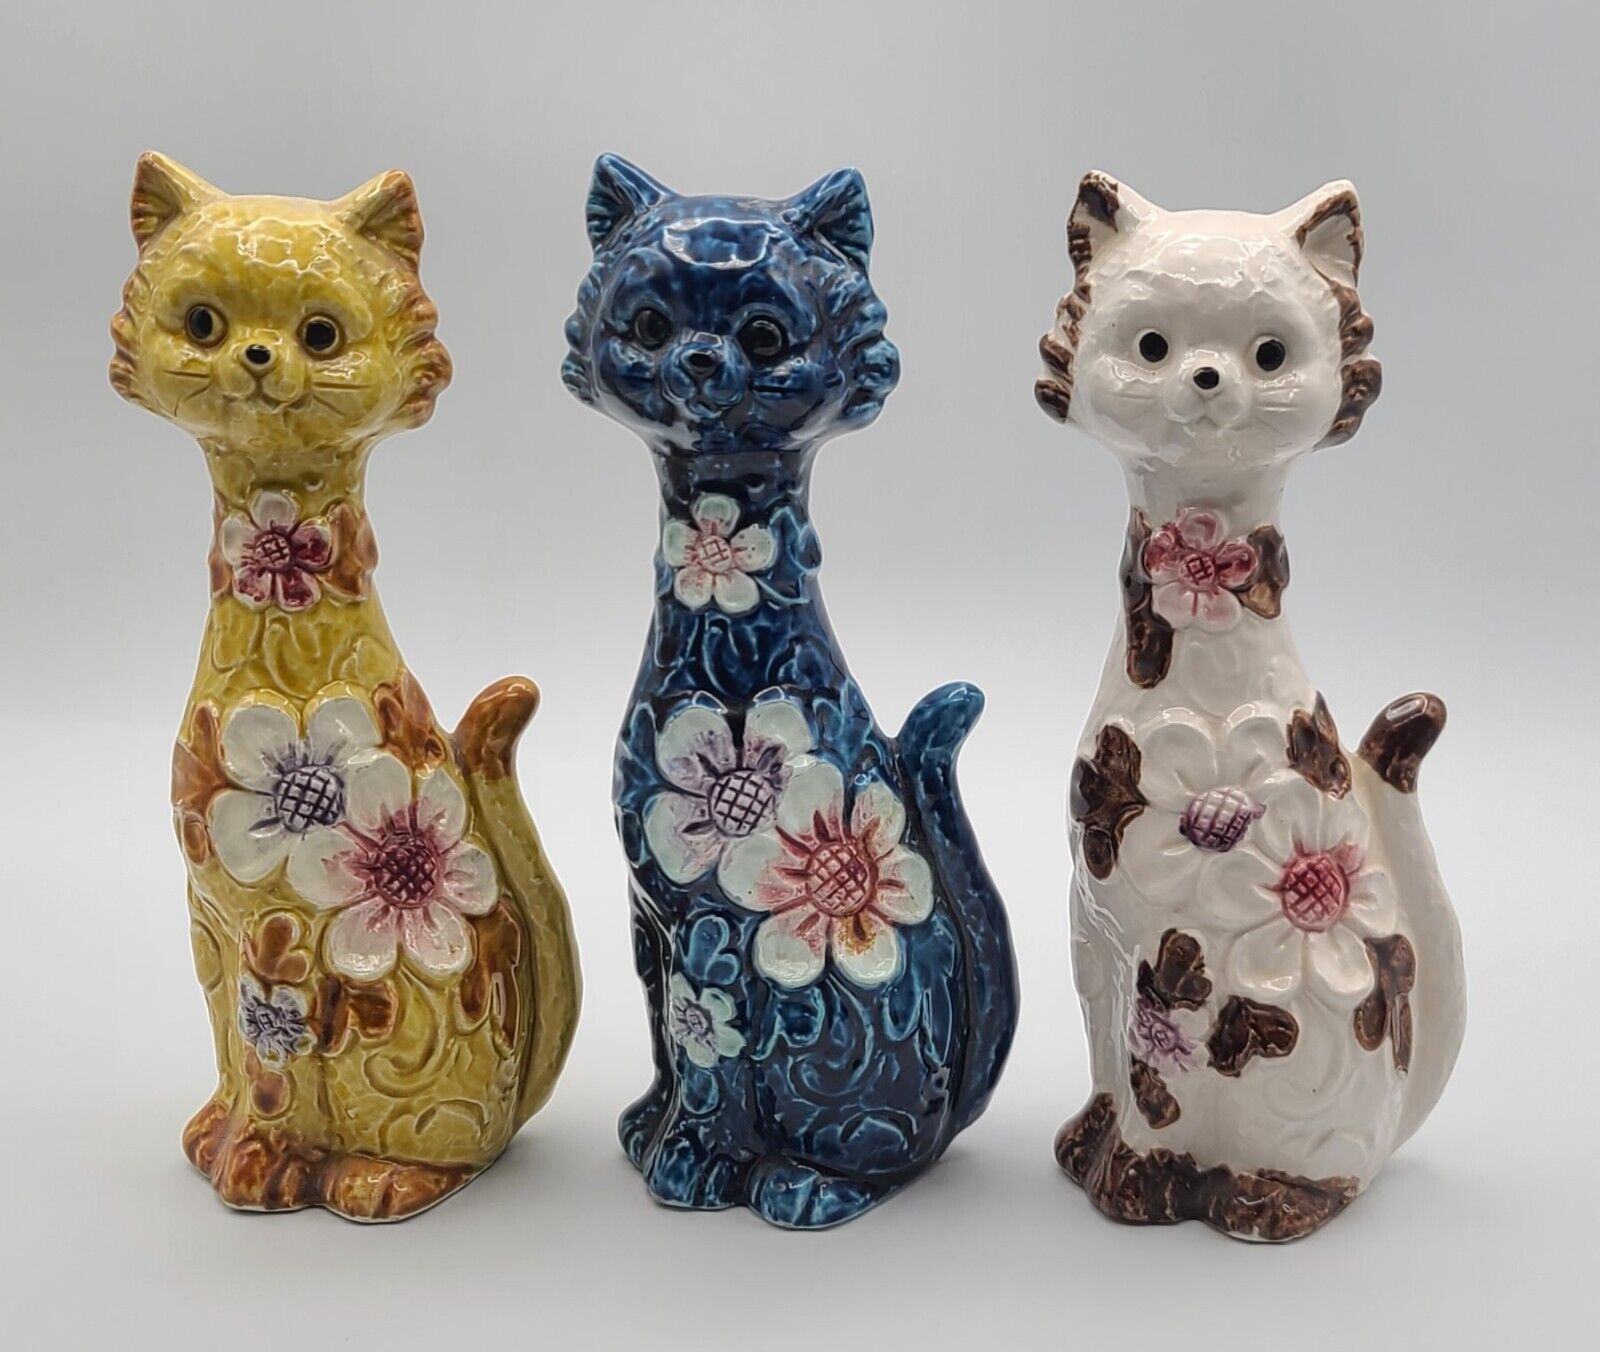 Vtg MCM Ceramic Cats Set of 3 Blue Yellow White w/Flowers Japan 9 in